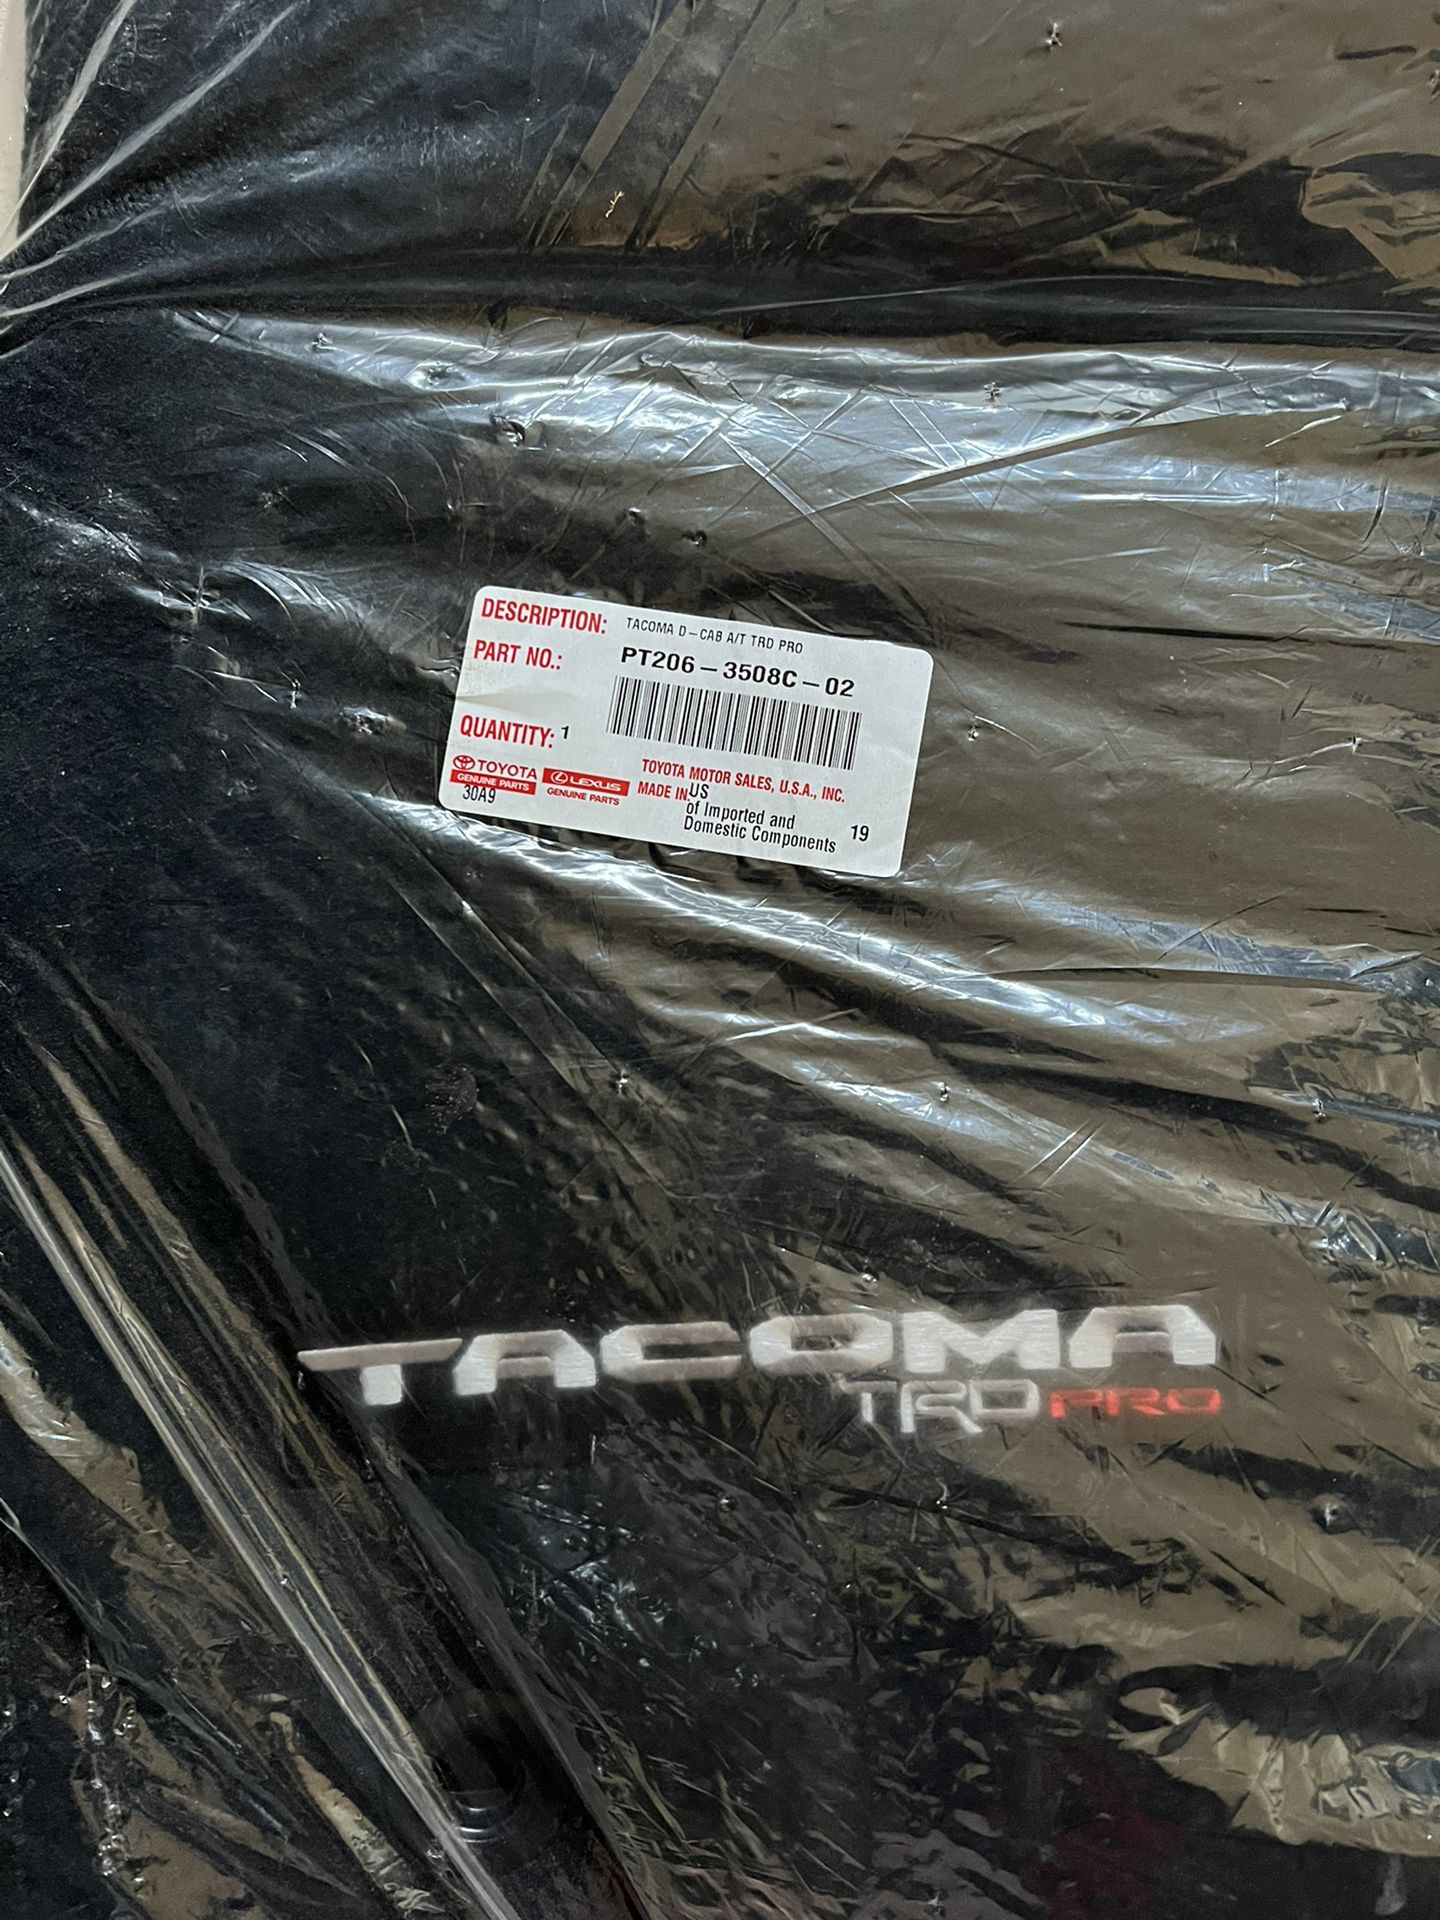 2018-2020 Toyota Tacoma TRD Pro Factory Carpeted Floor Mats Black PT(contact info removed)C-02